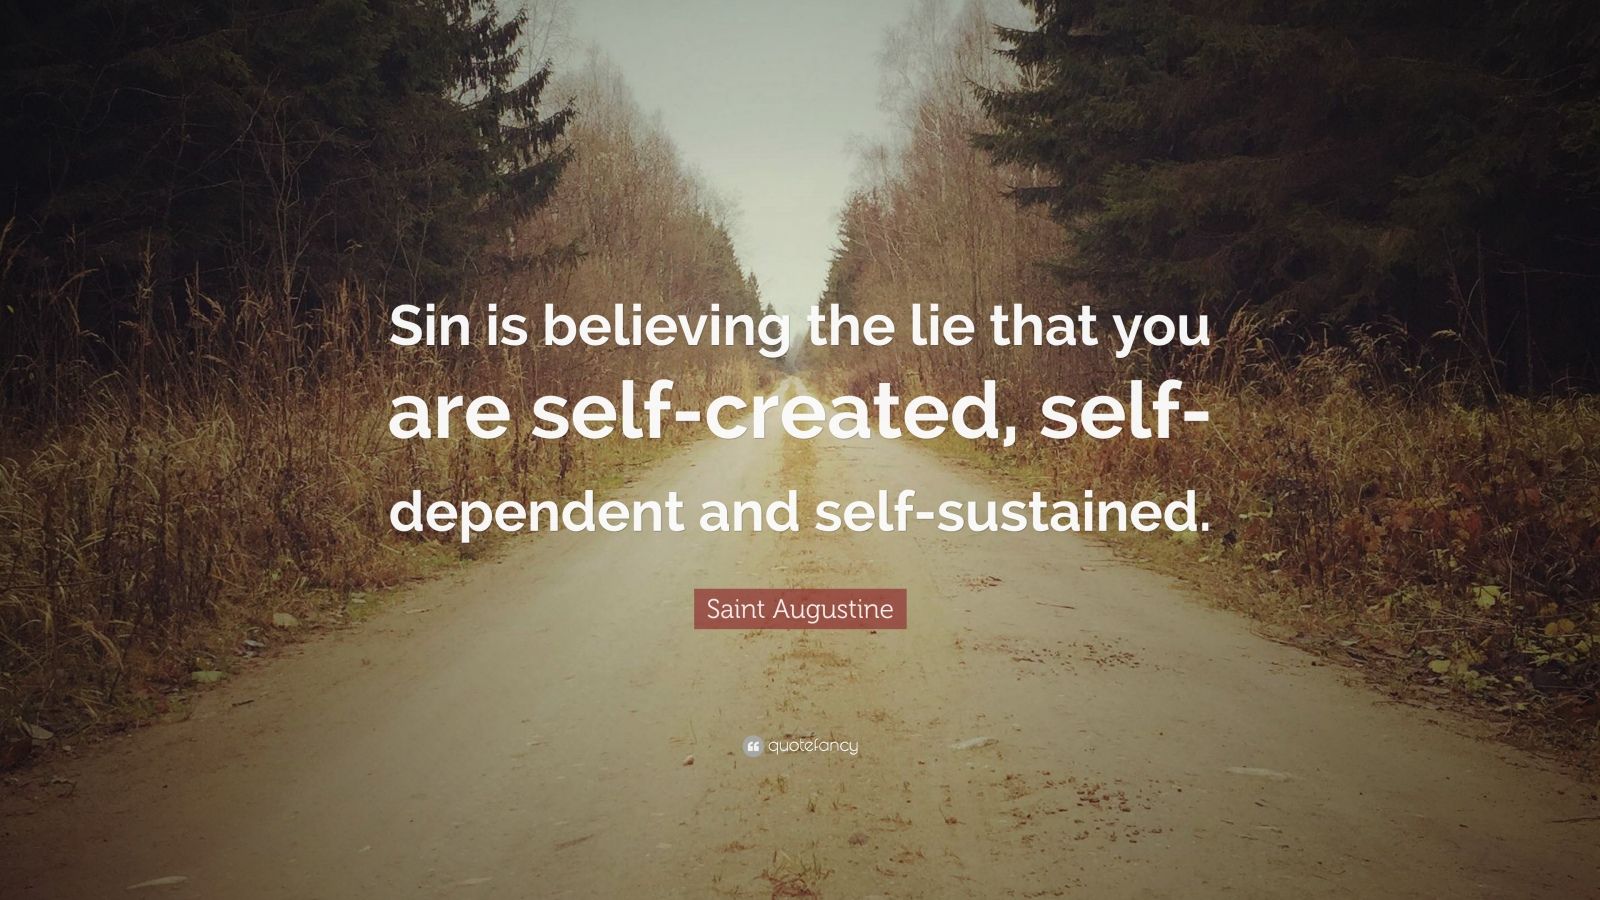 Saint Augustine Quote: “Sin is believing the lie that you are self